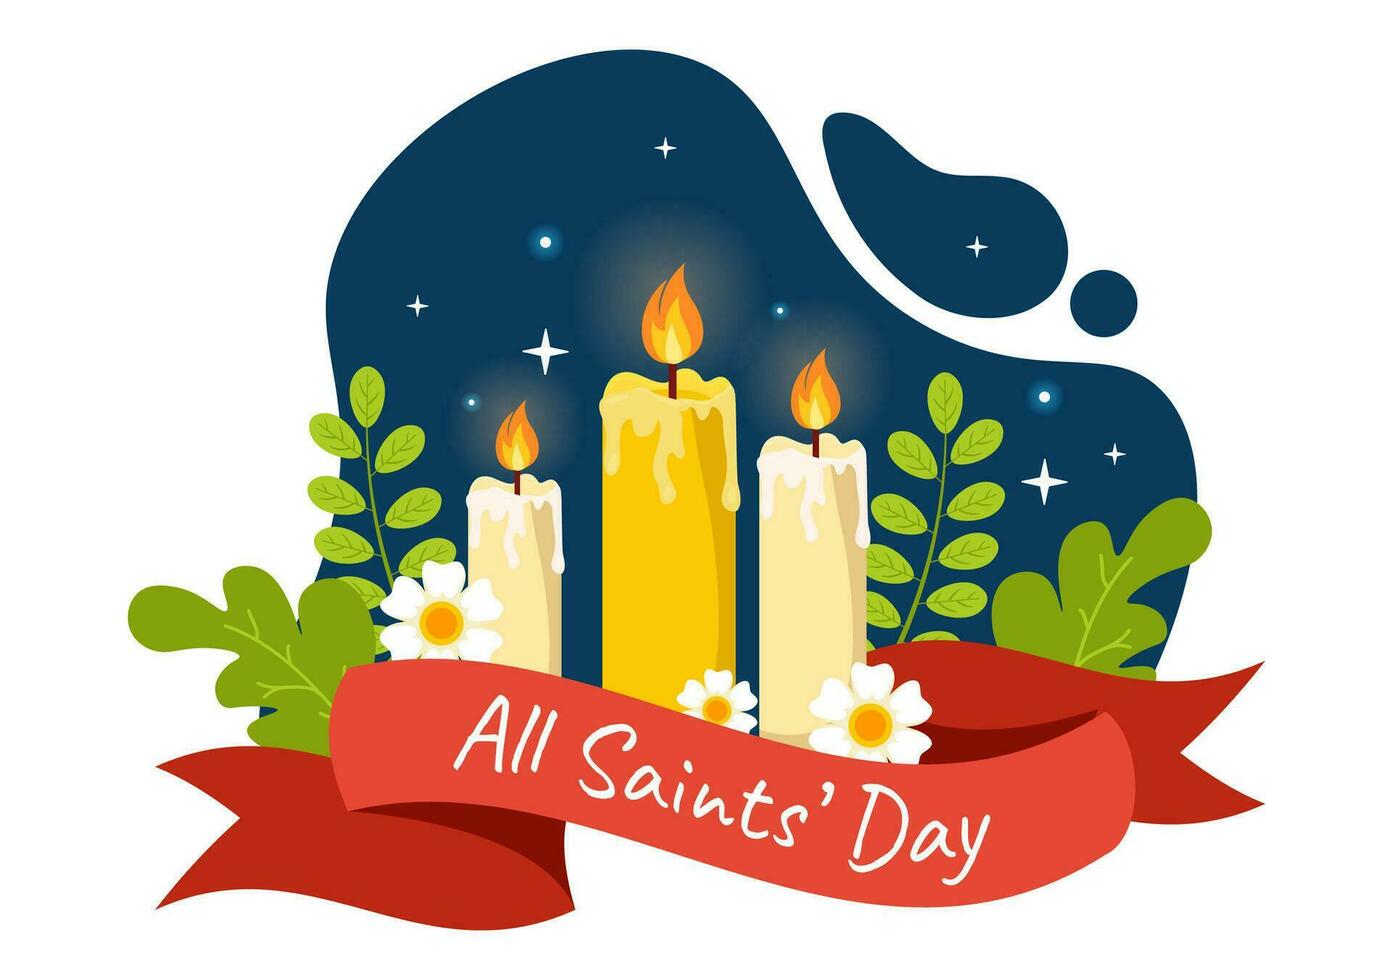 All Saints Day Vector Illustration on 1st November with for the All Souls Remembrance Celebration with Candles in Flat Cartoon Background Design